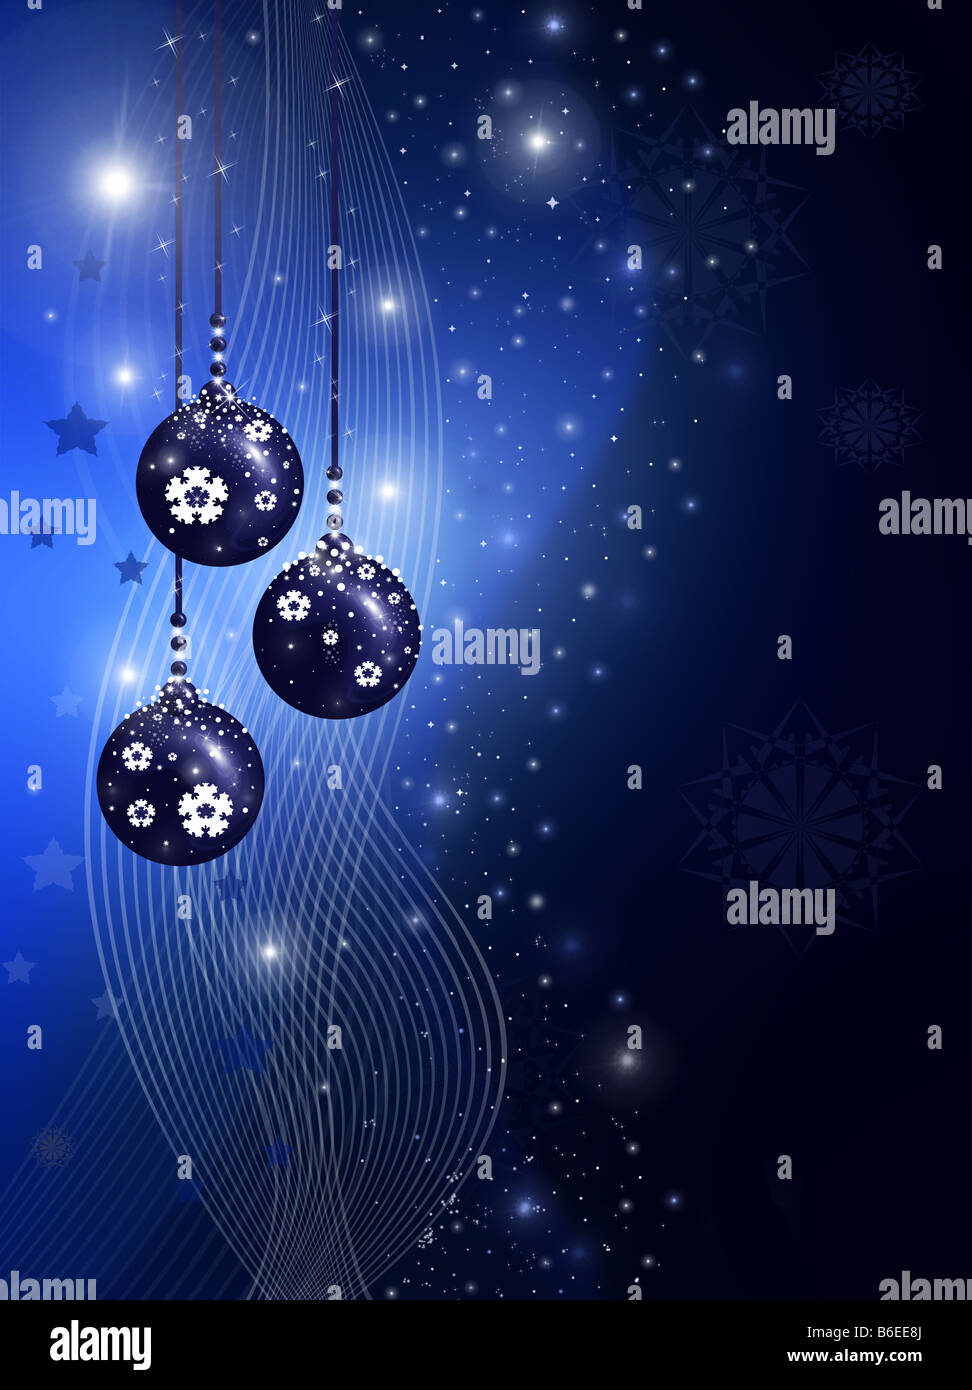 Blue christmas illustration with balls stars and snowflakes Stock Photo